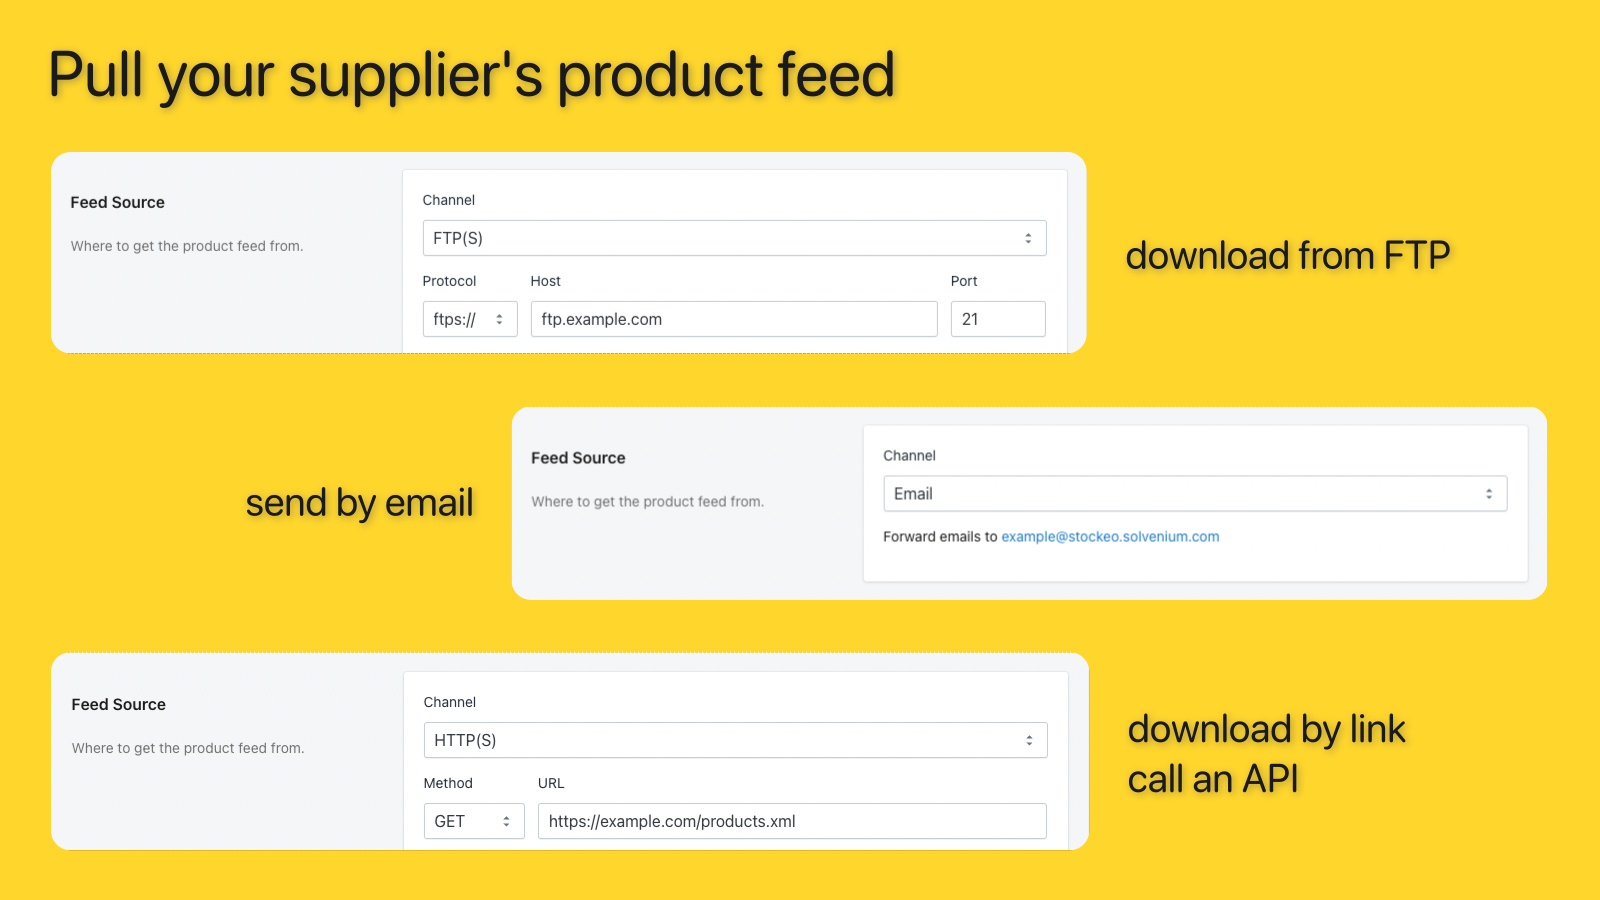 Feed Source - Email, FTP, HTTP